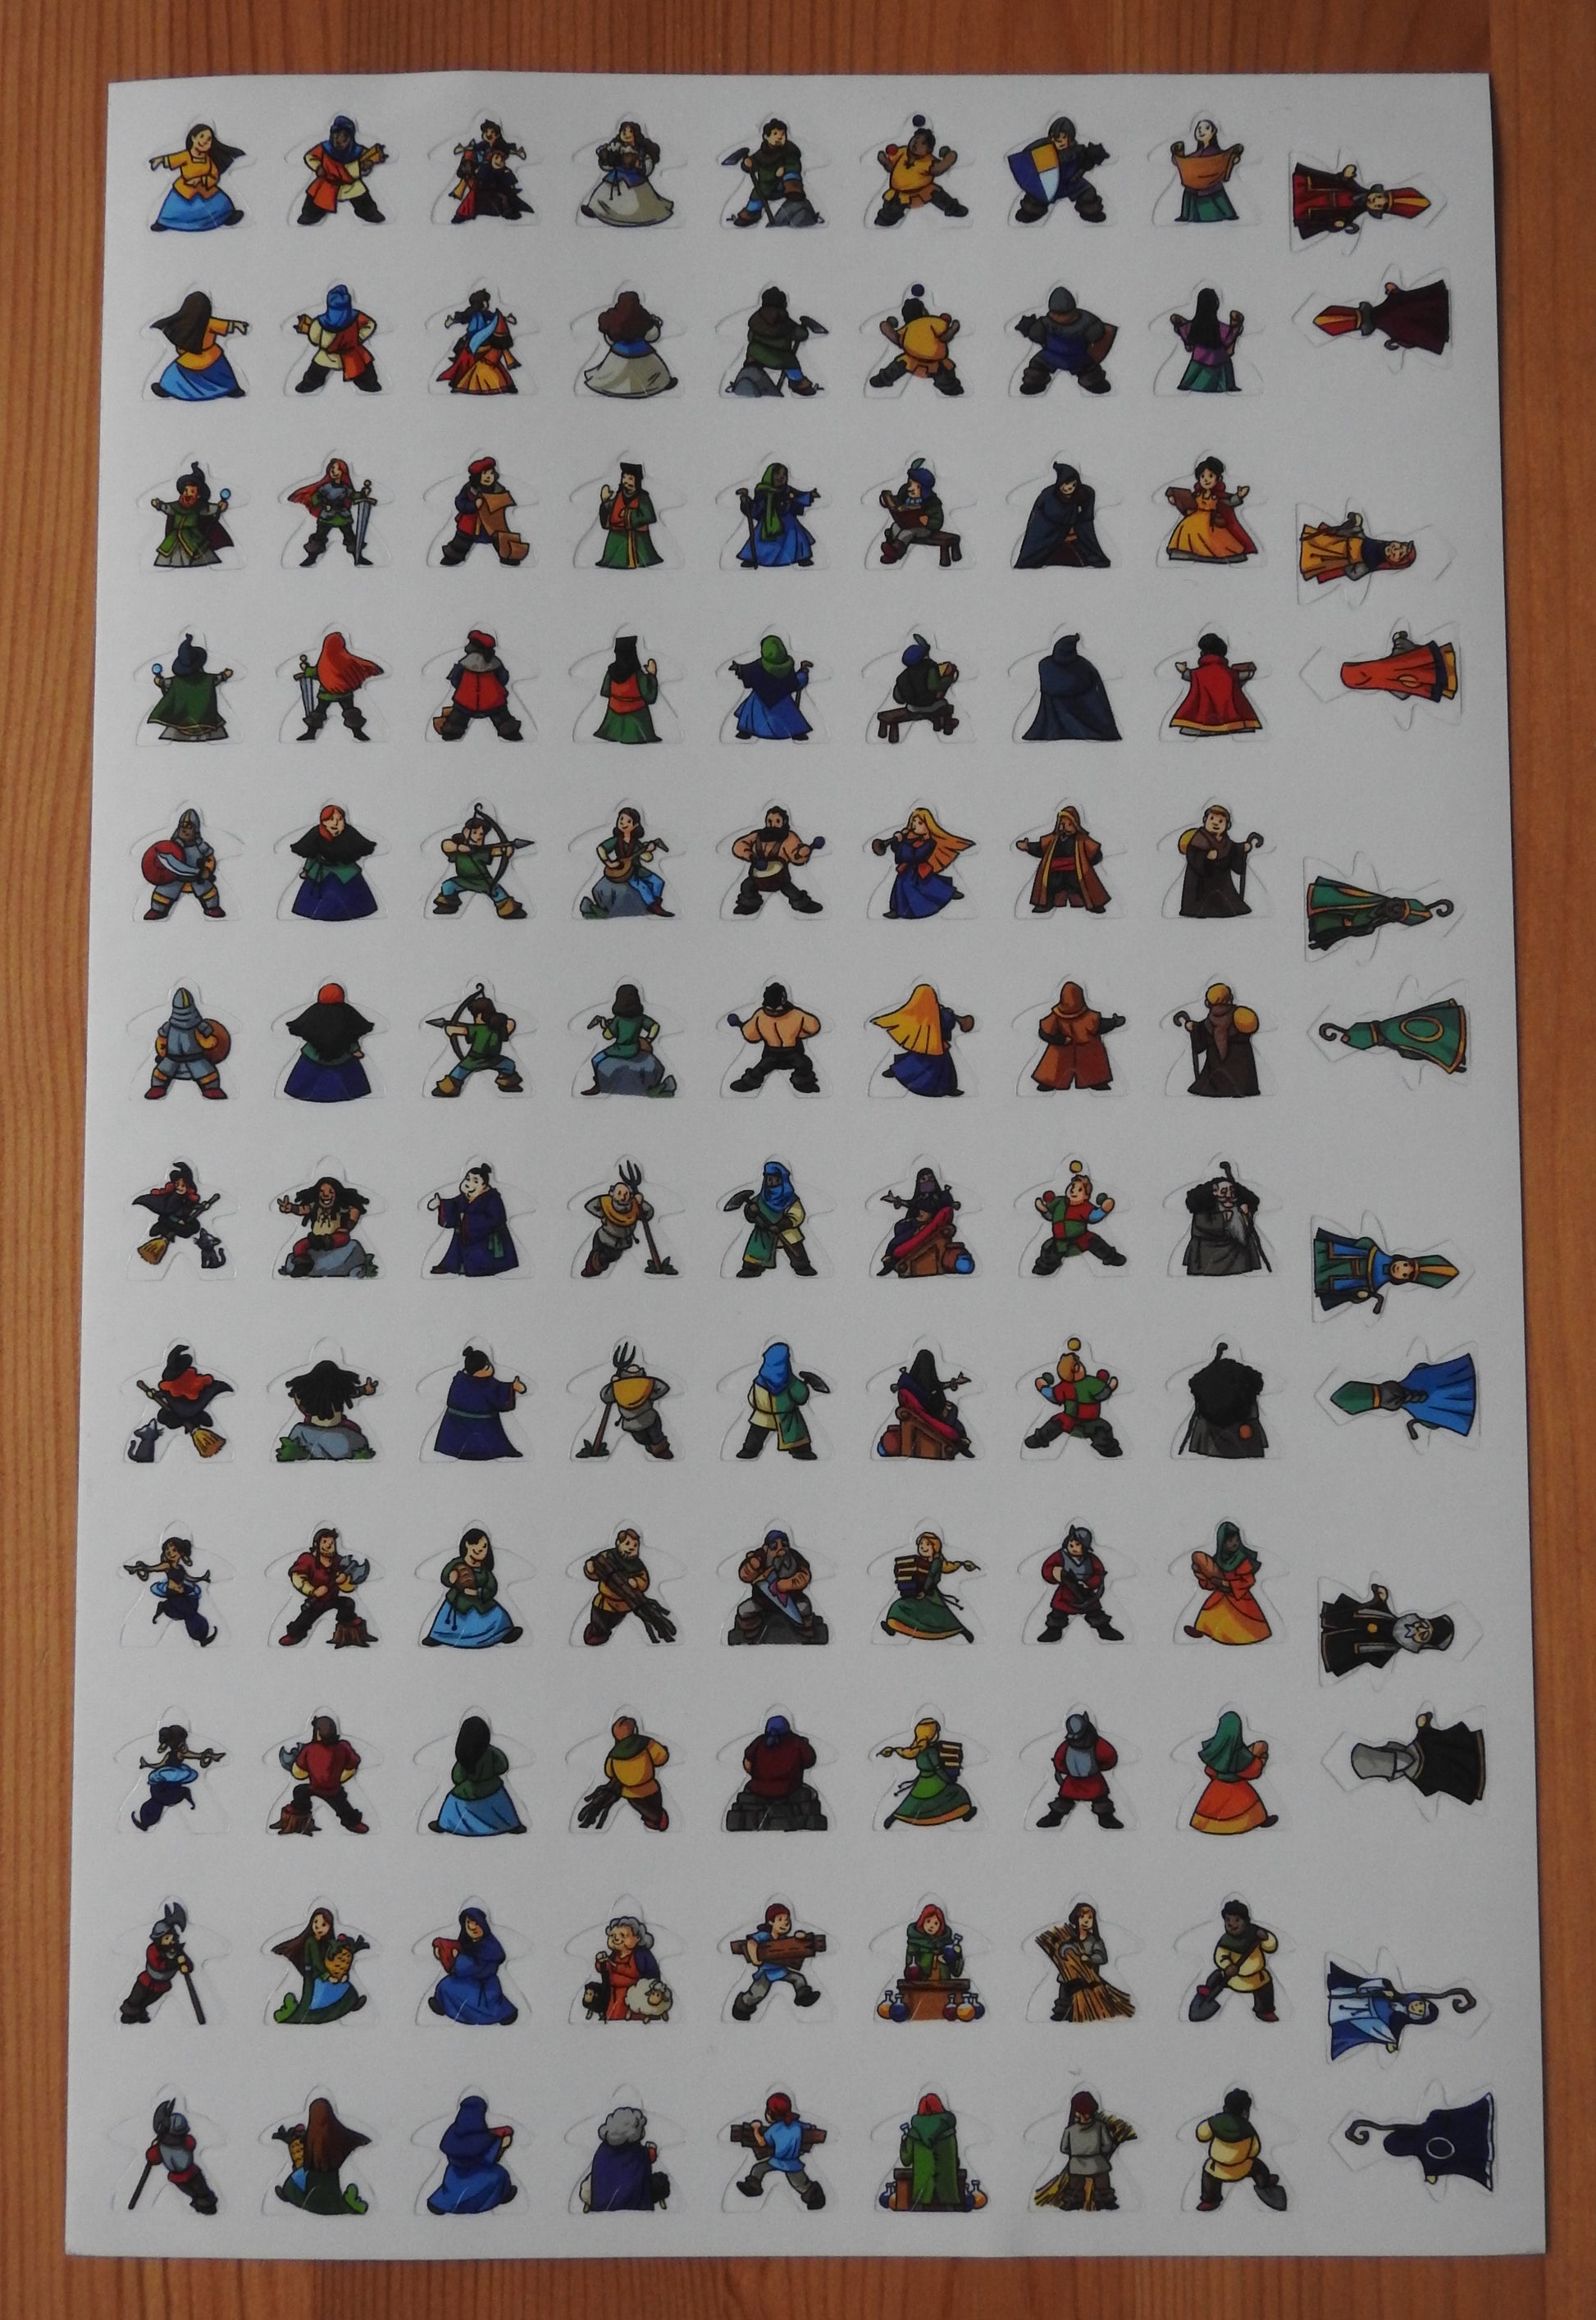 Top view showing the entire sticker sheet containing 108 stickers.